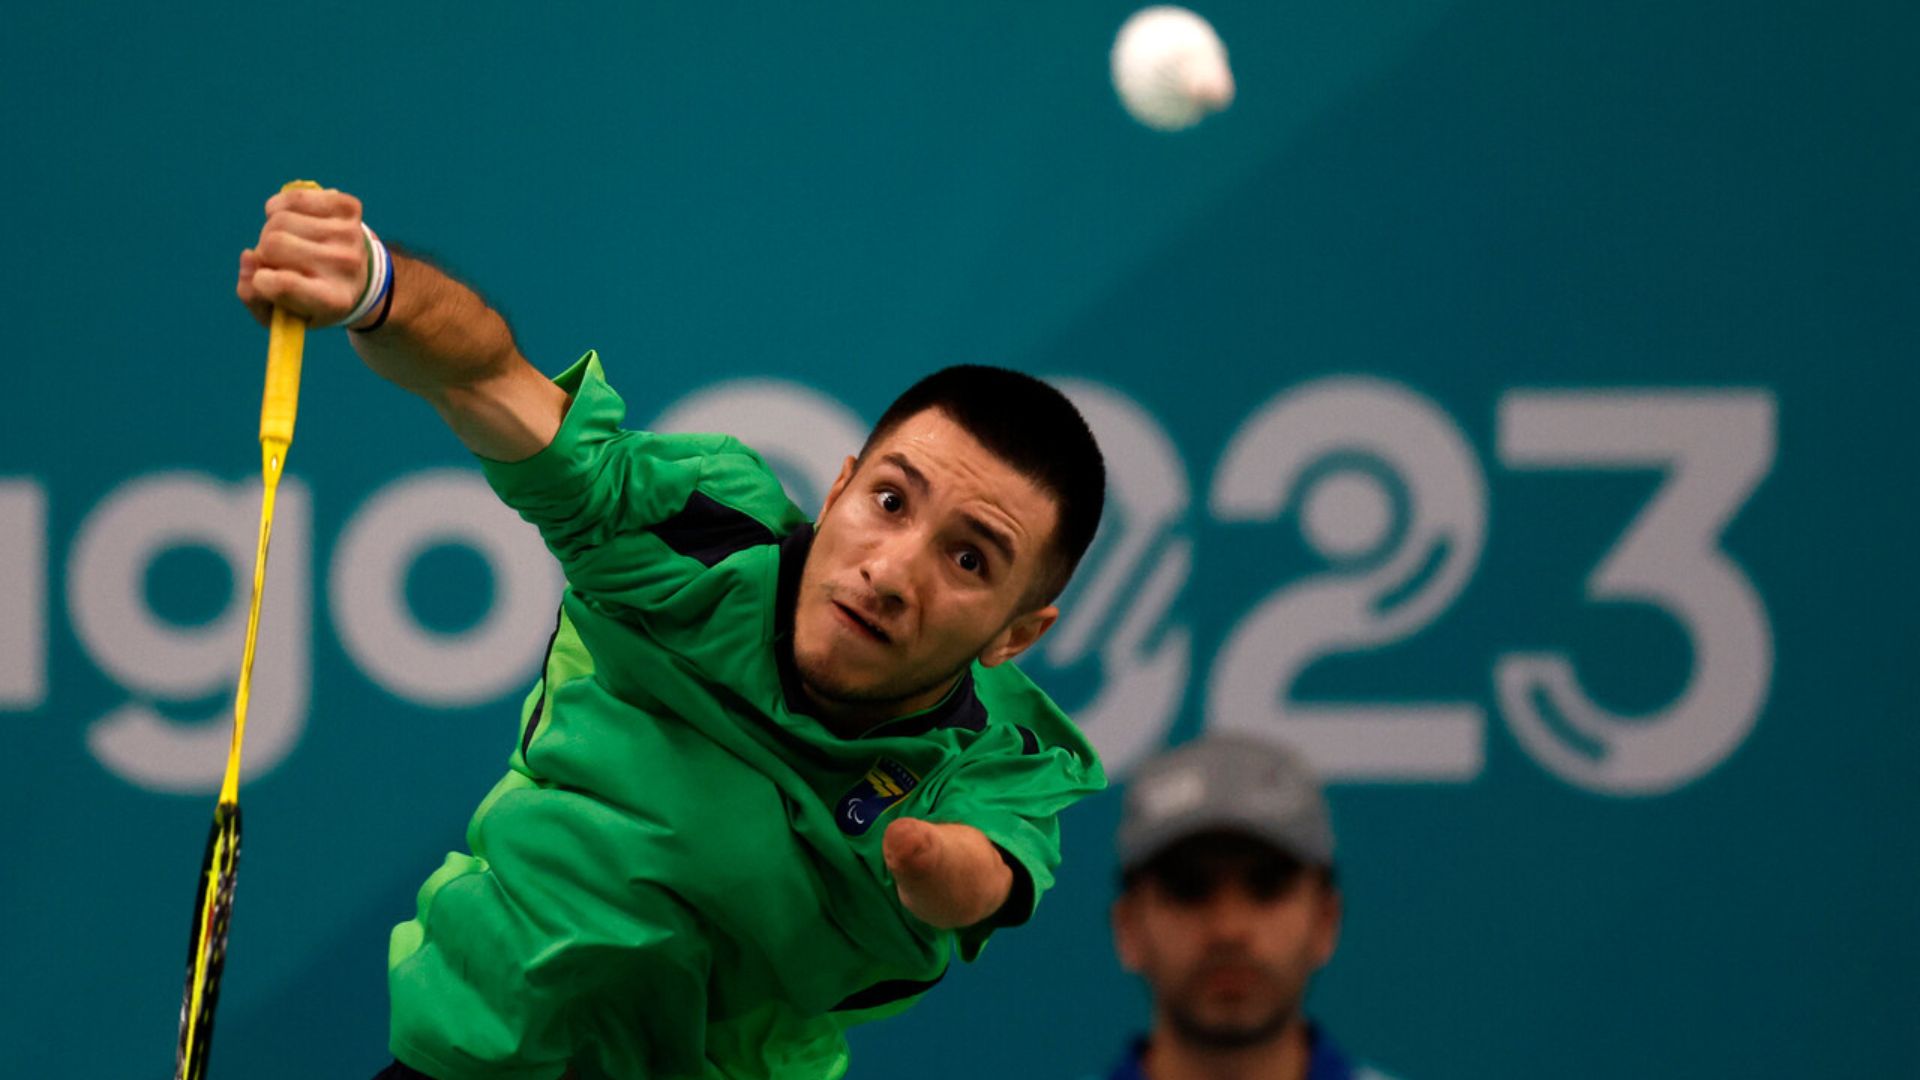 Brazil Takes All Golds in Para Badminton